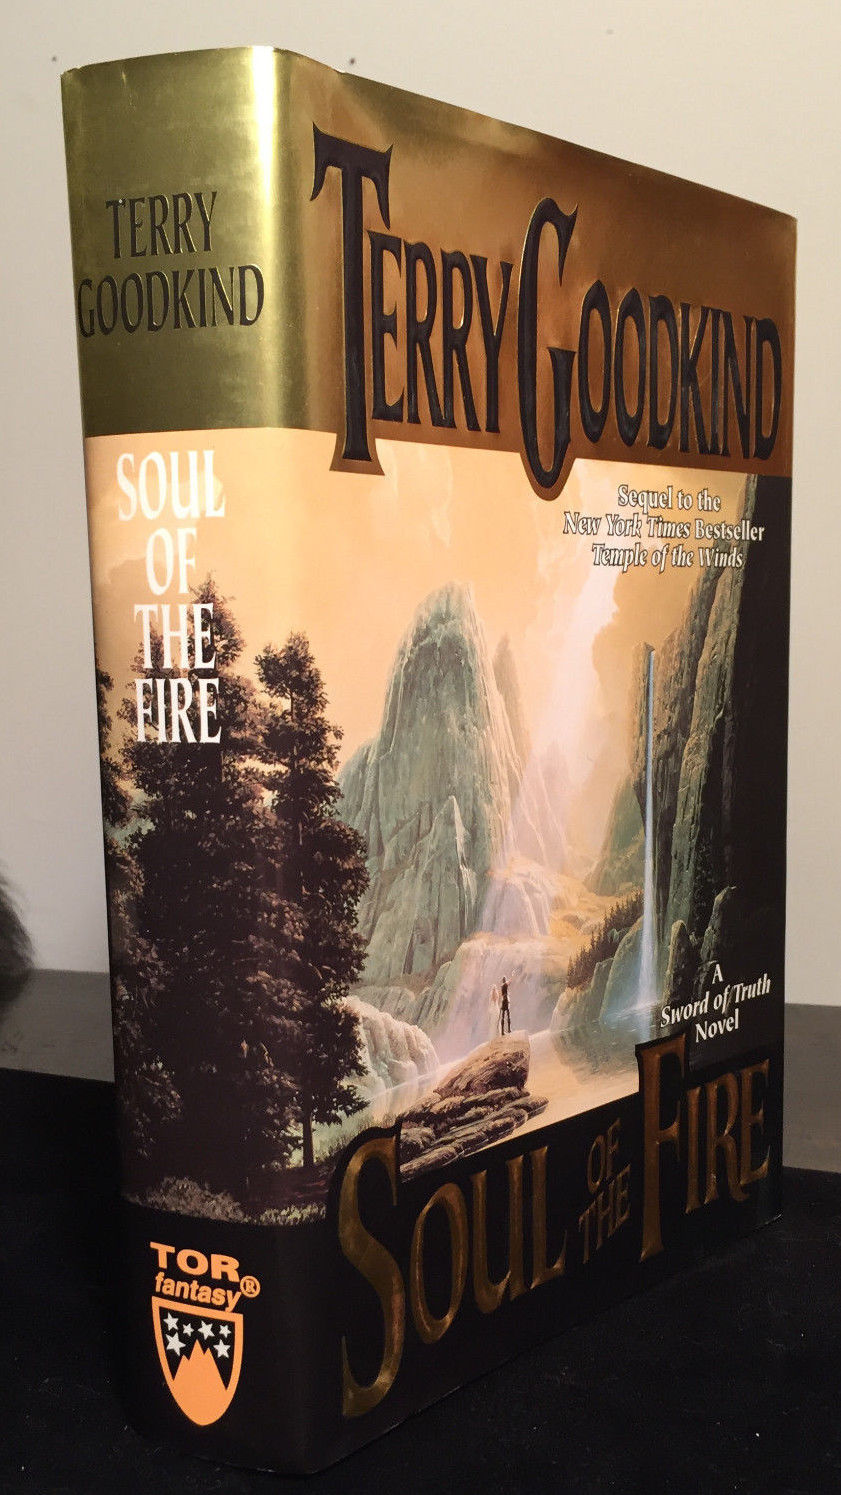 SOUL OF THE FIRE, Terry Goodkind 1st/1st 1999 HC/DJ Excellent Condition, SIGNED